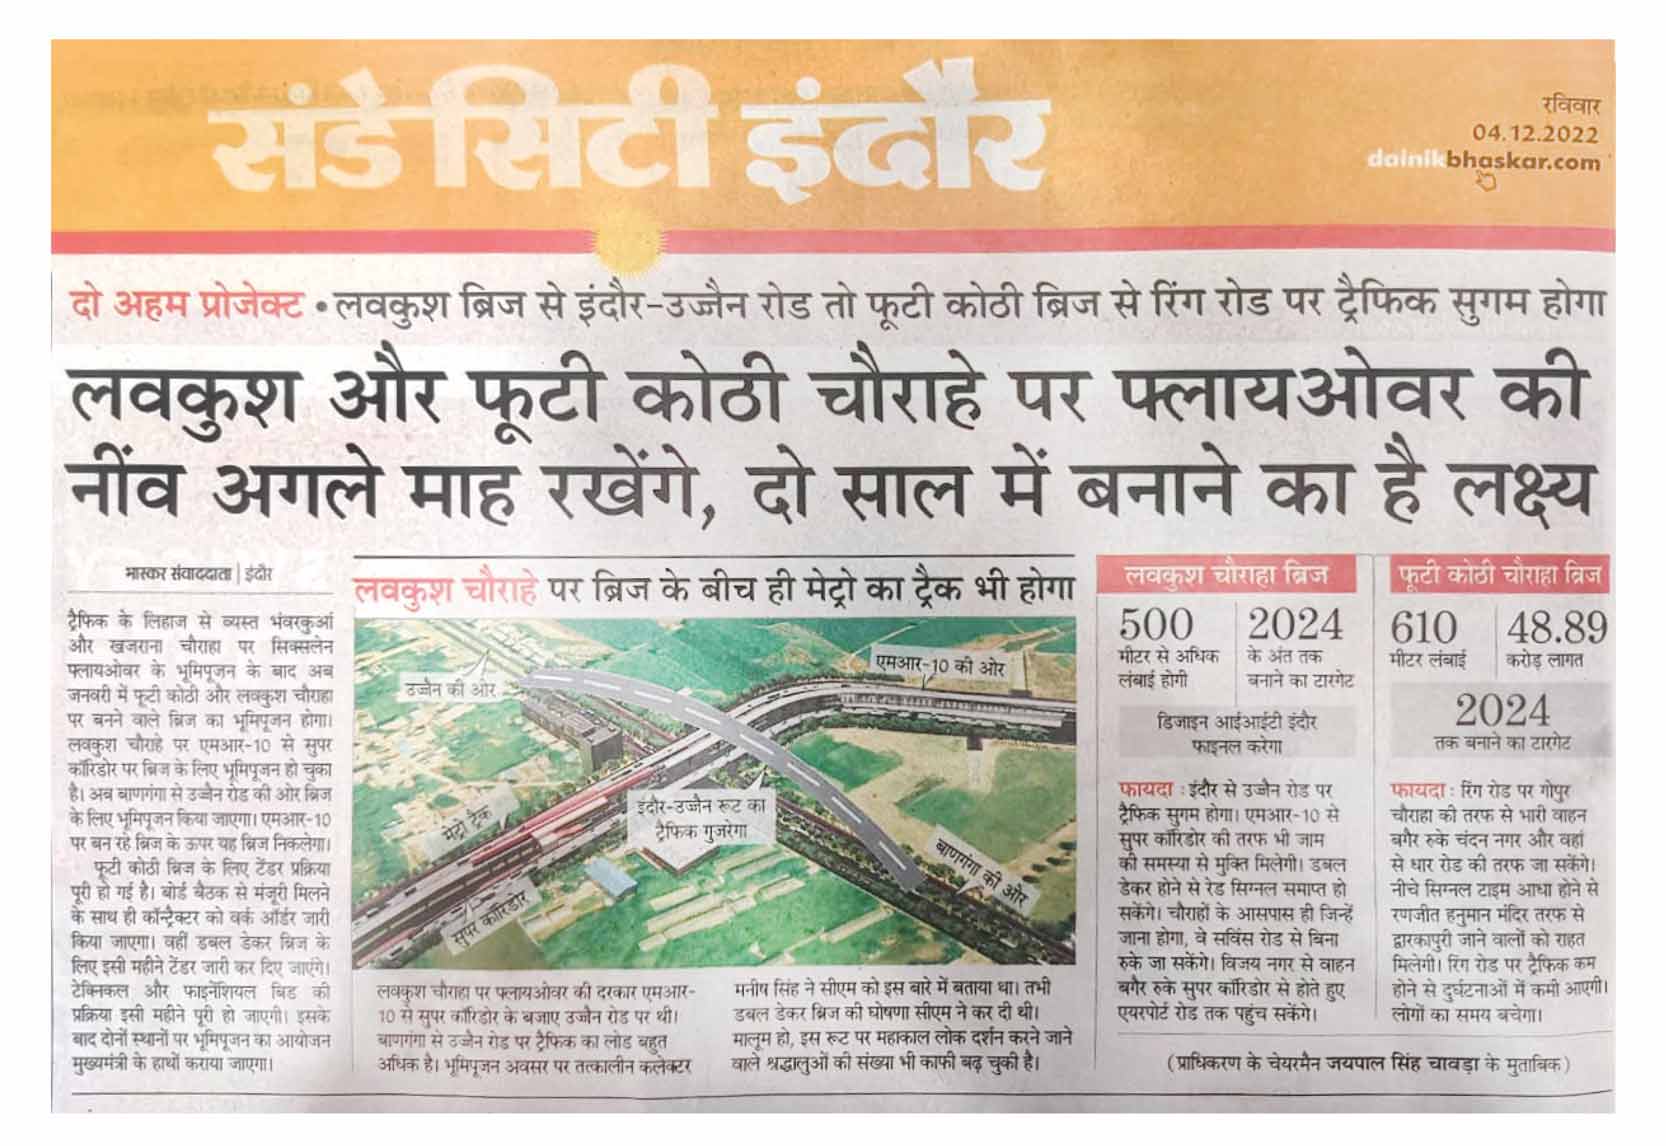 Works for Luv Kush Fly-over Bridge connecting Indore- Ujjain commences